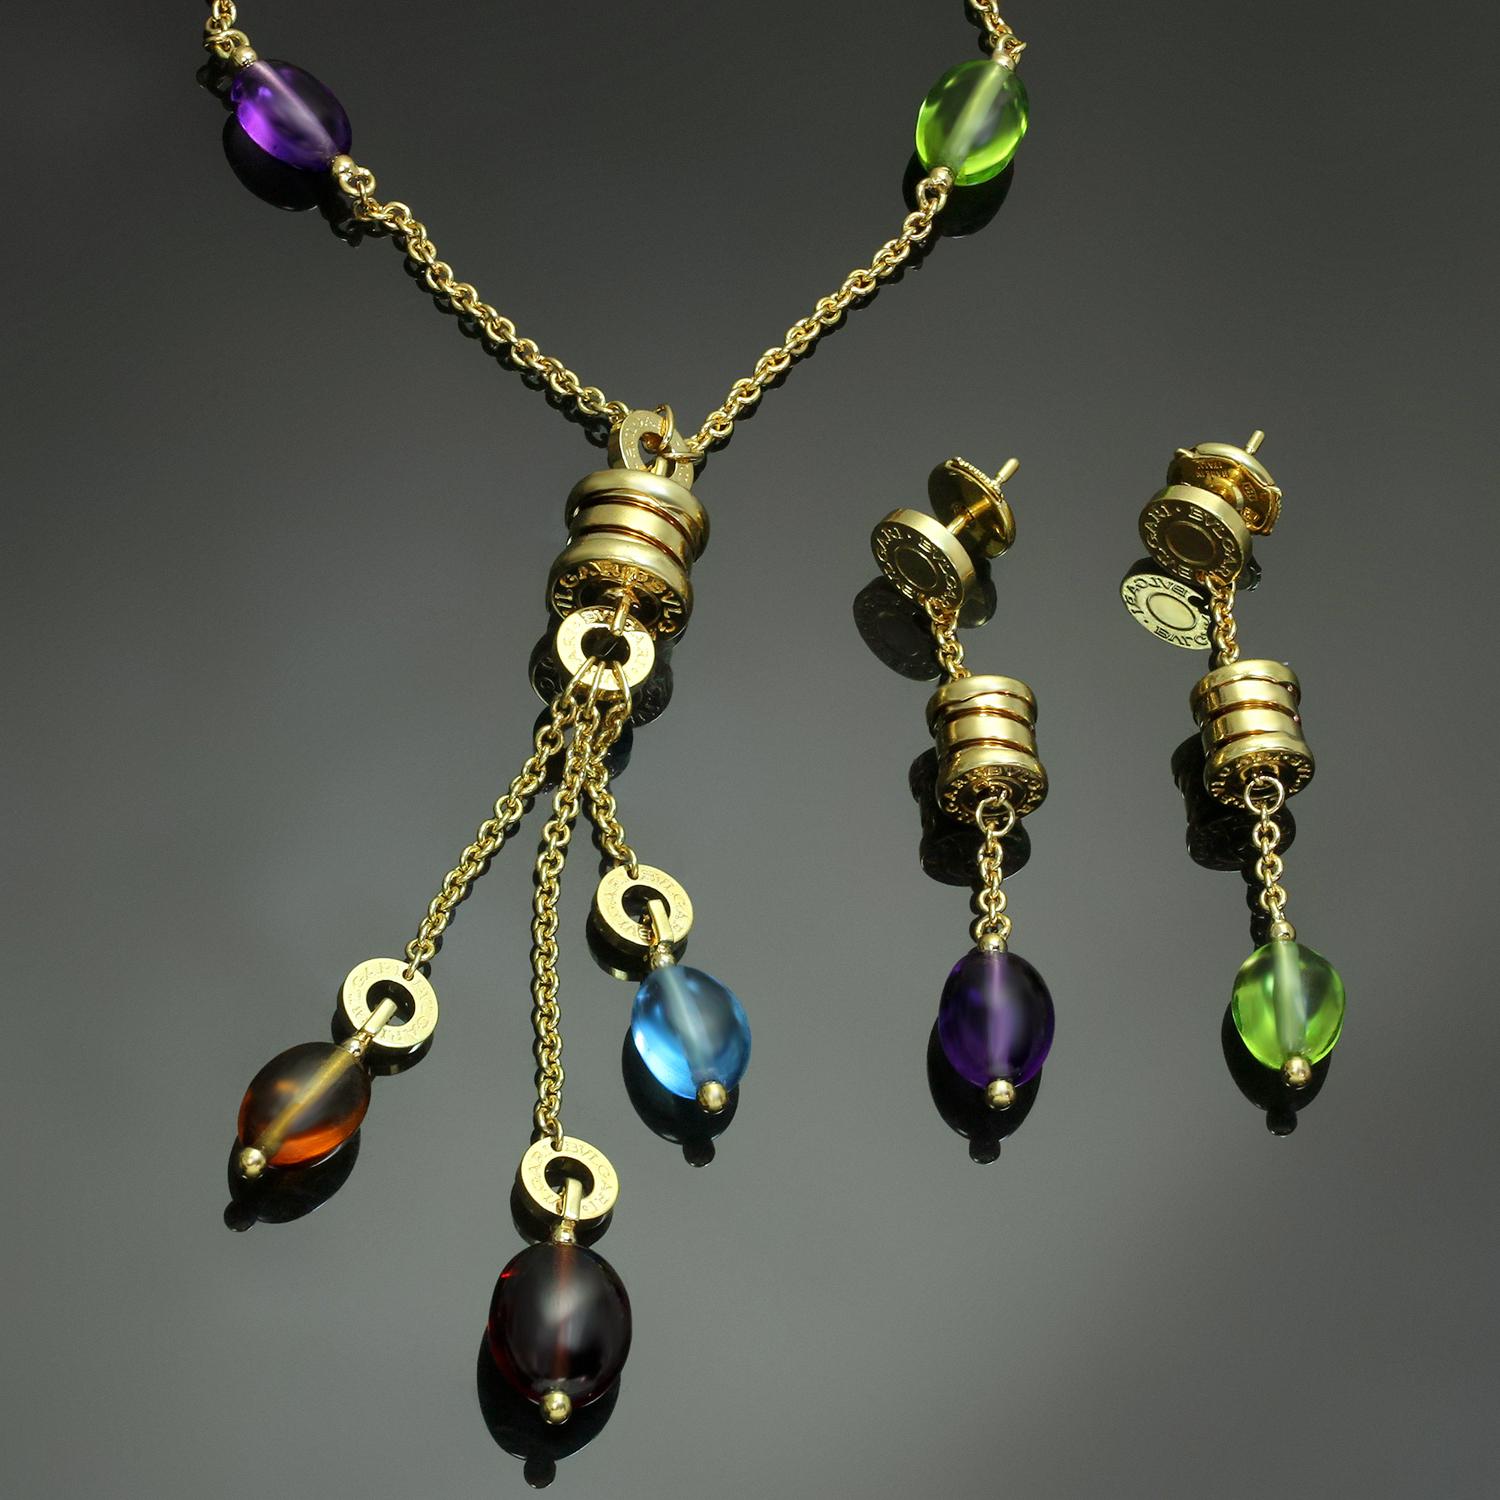 This gorgeous jewelry suite from Bulgari's iconic B.Zero1 collection features a drop necklace and a pair of drop earrings crafted in 18k yellow gold and set with a colorful array of cabochon gemstones - peridot, rhodolite, garnet, amethyst, blue